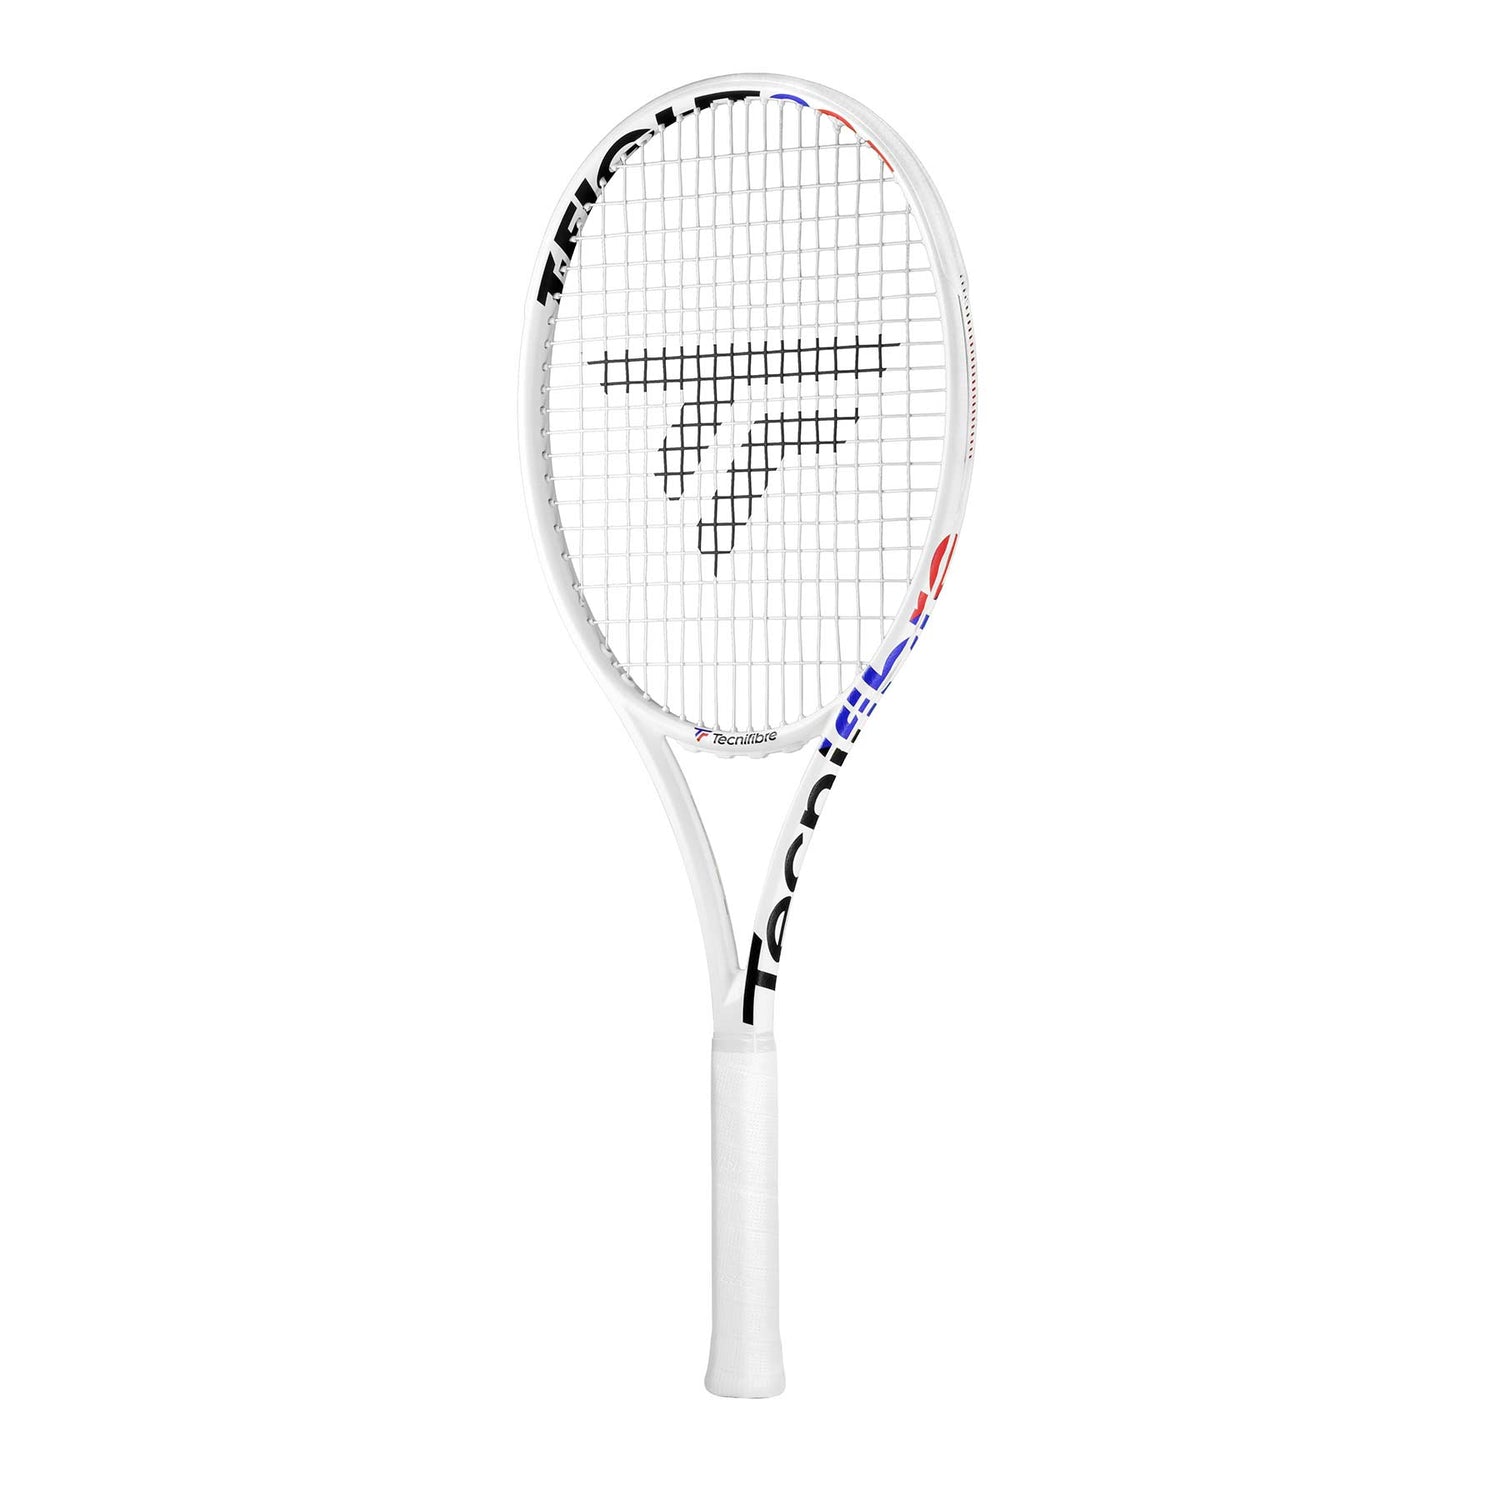 Tecnifibre T-Fight ISO 270 Tennis Racket with an elegant White/Royal/Red color combination